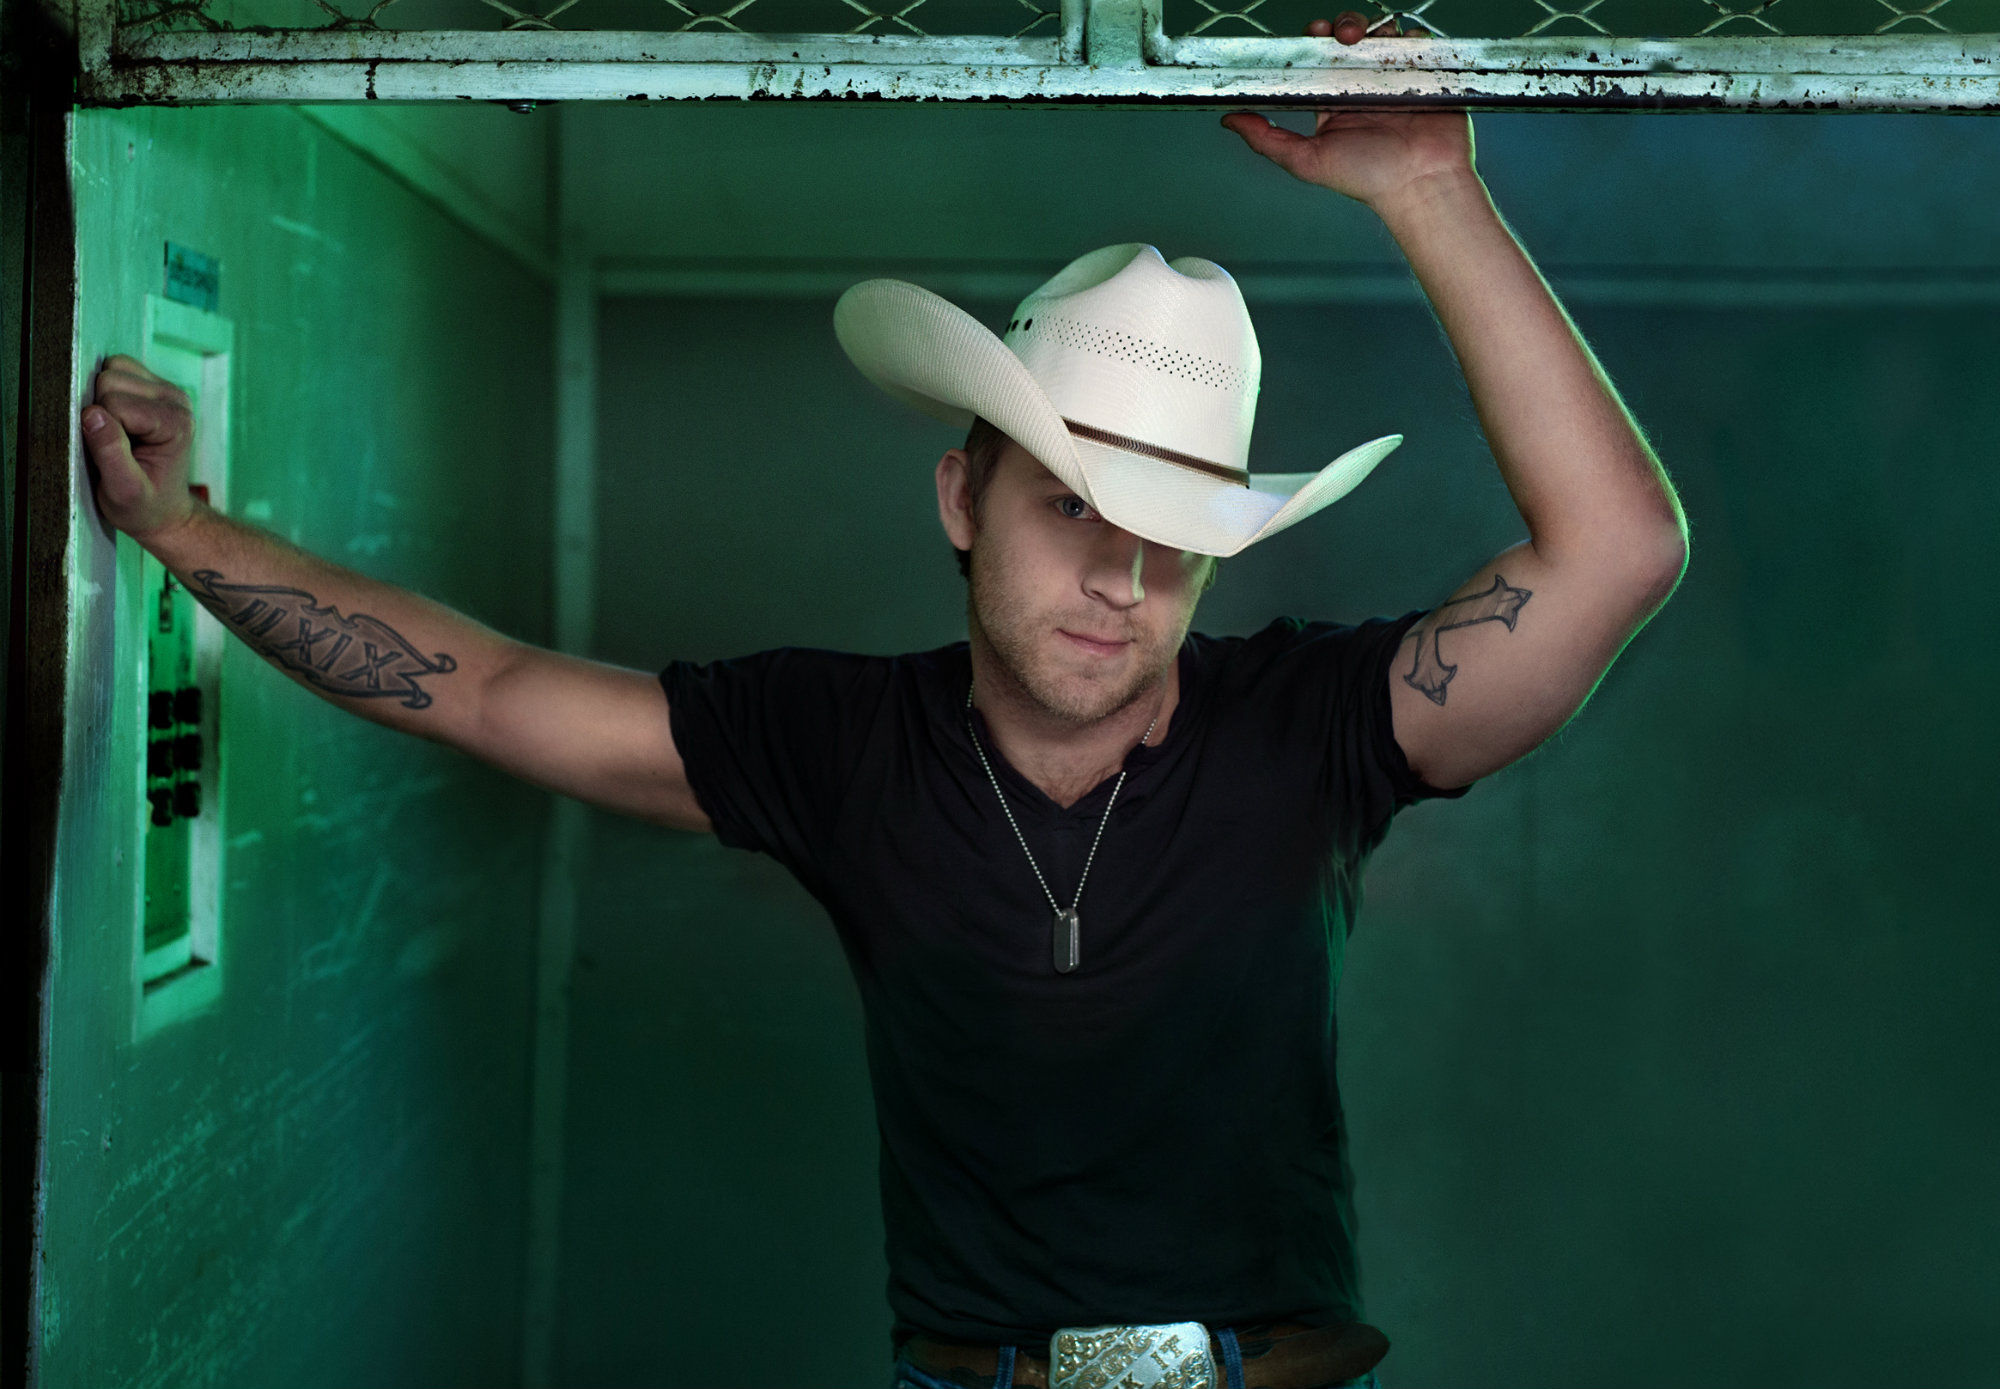 Justin Moore Backgrounds, Compatible - PC, Mobile, Gadgets| 2000x1389 px